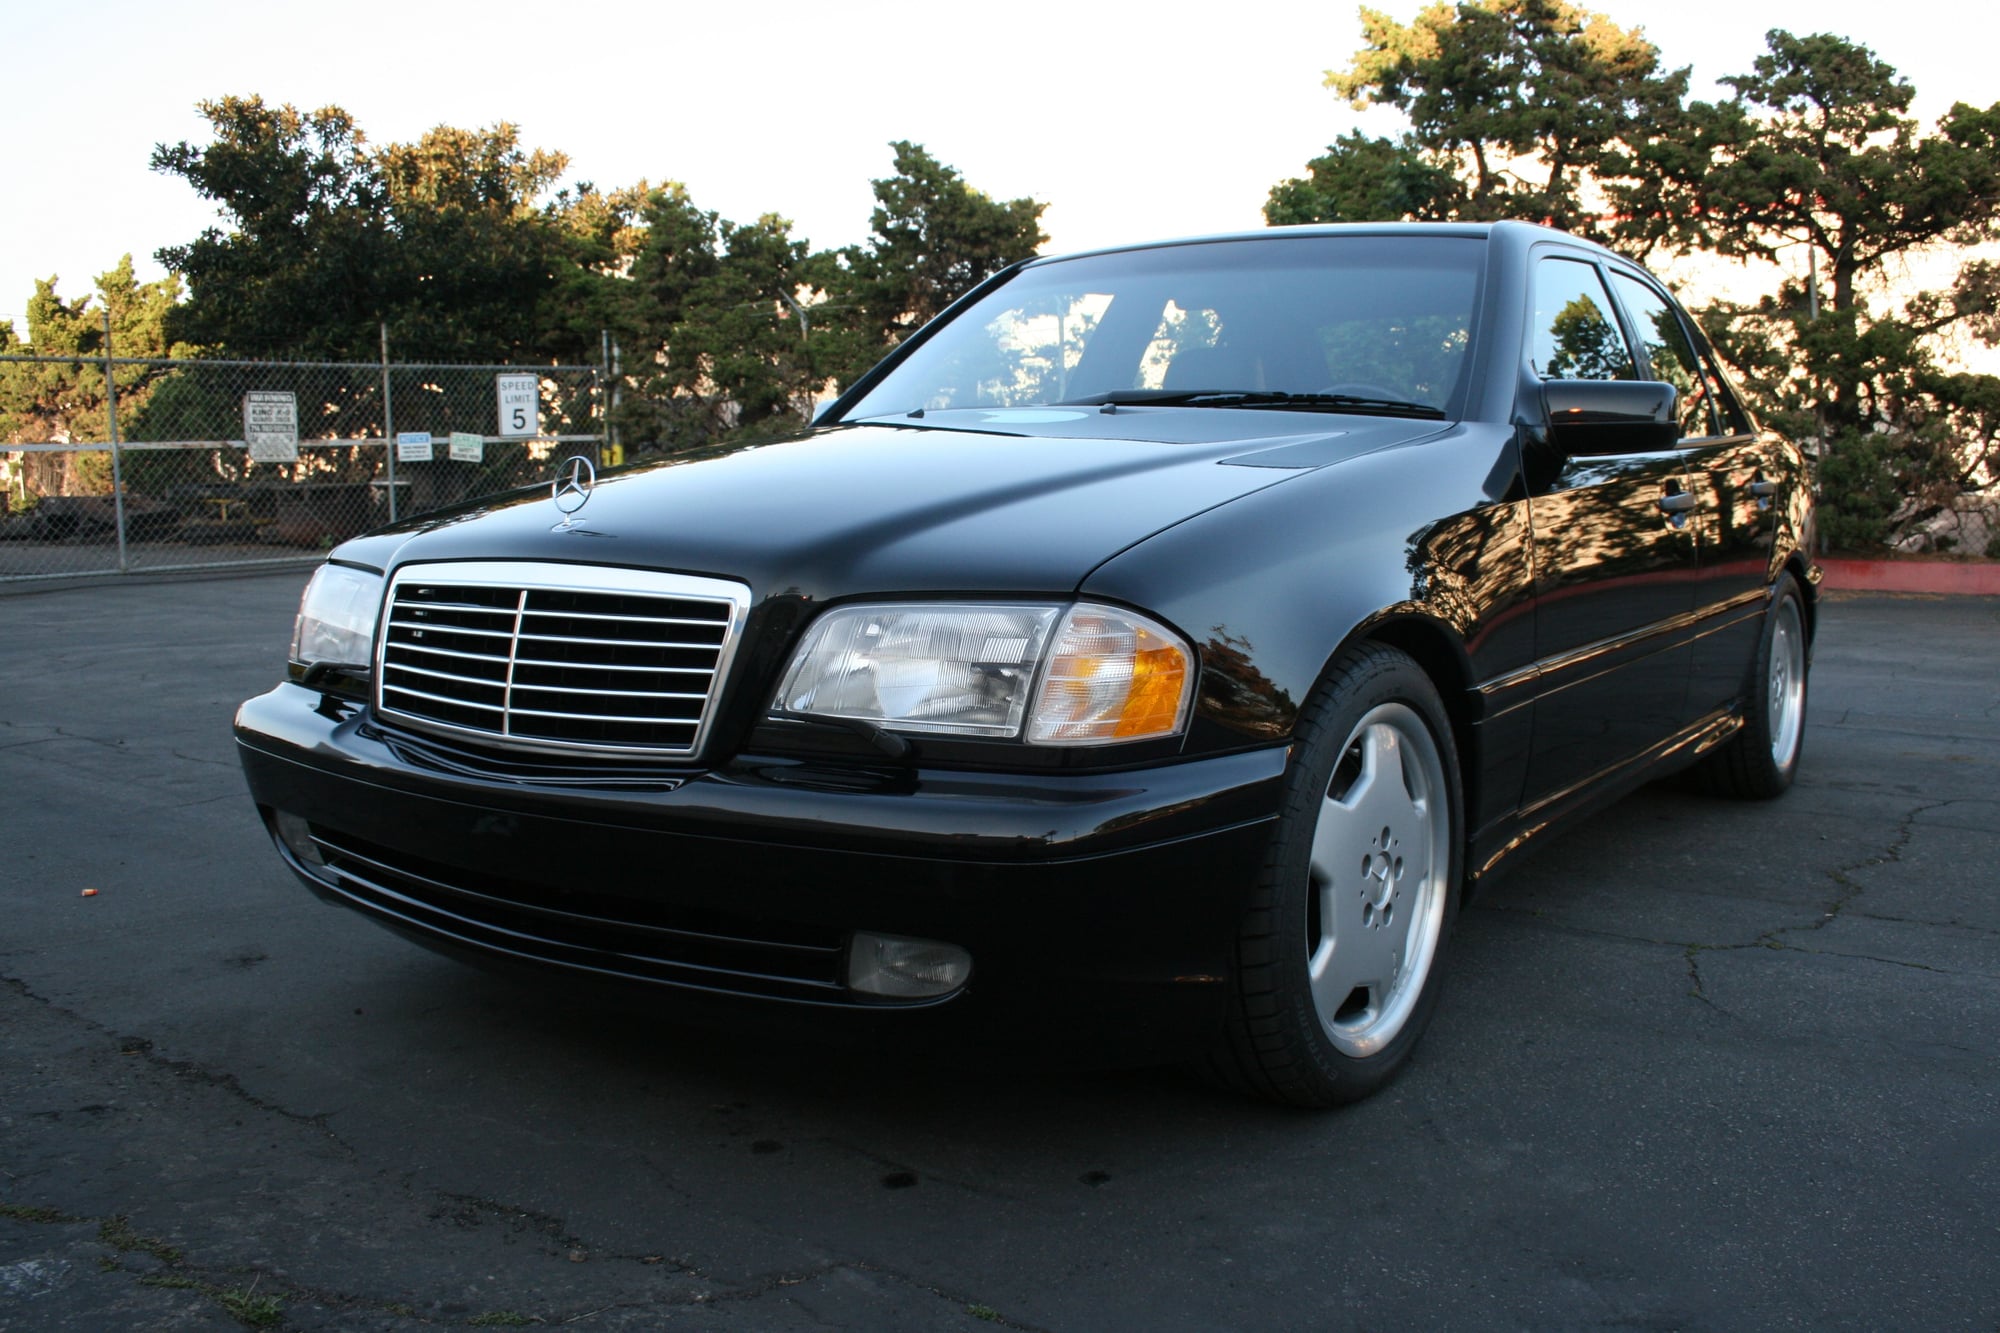 1999 Mercedes-Benz C43 AMG - 1999 Mercedes C43 AMG w202 46k miles Excellent/Records - Used - VIN WDBHA33G5XF880998 - 46,500 Miles - 8 cyl - 2WD - Automatic - Orange, CA 92869, United States